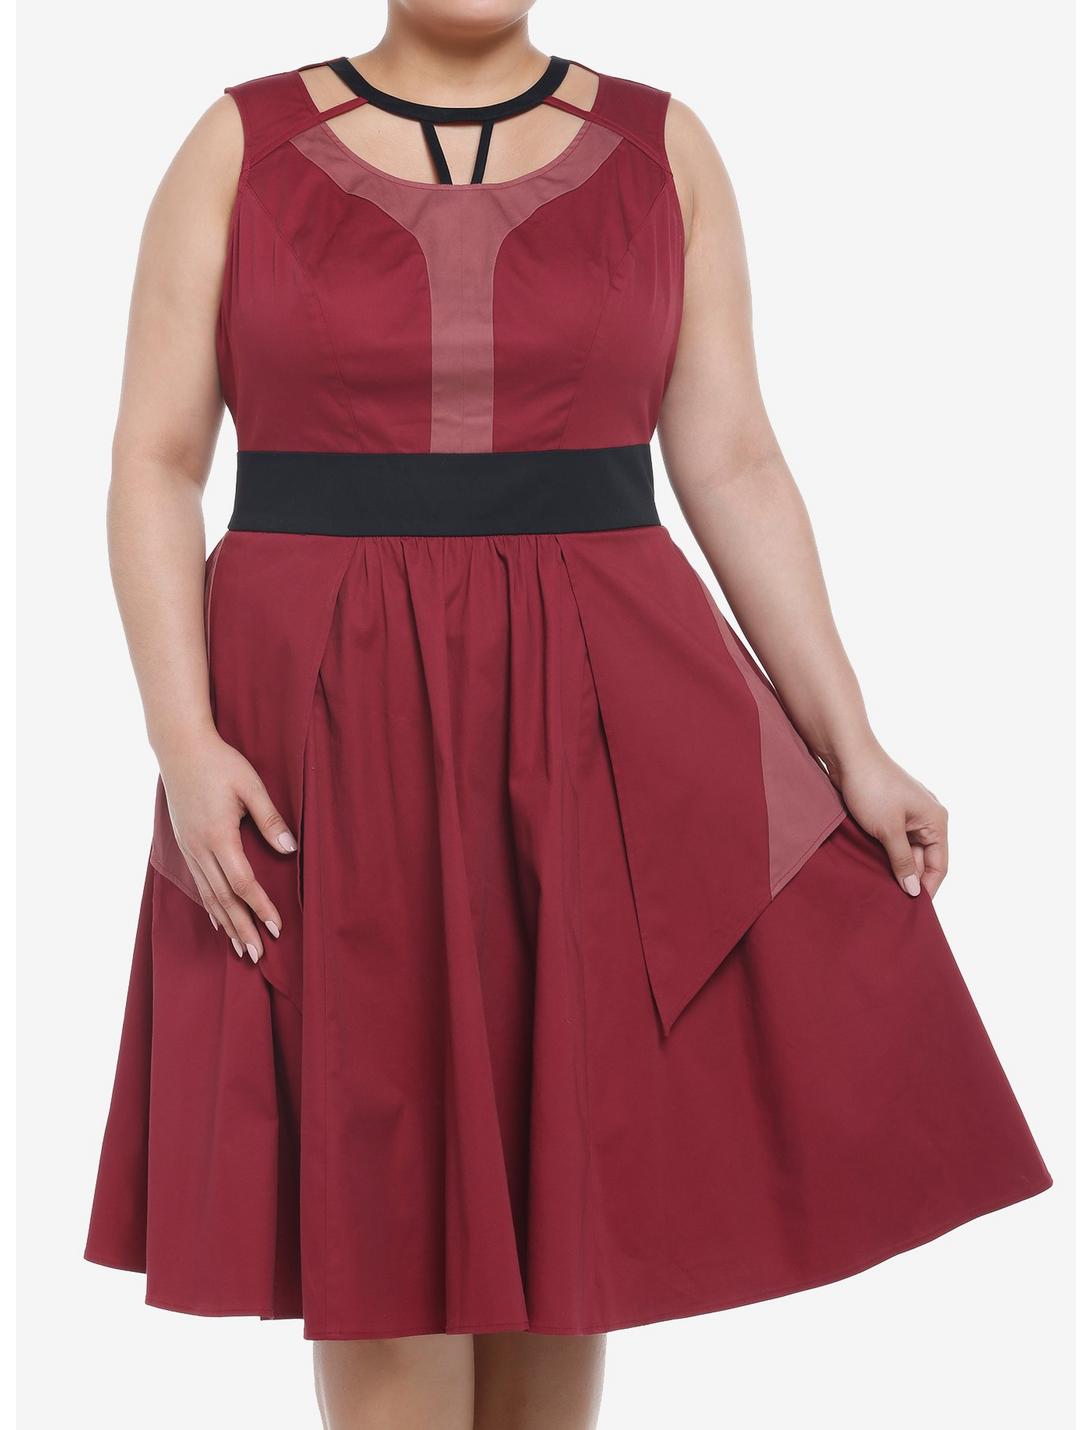 Her Universe Marvel Doctor Strange In The Multiverse Of Madness Scarlet Witch Swing Dress Plus Size Her Universe Exclusive, BURGUNDY, hi-res